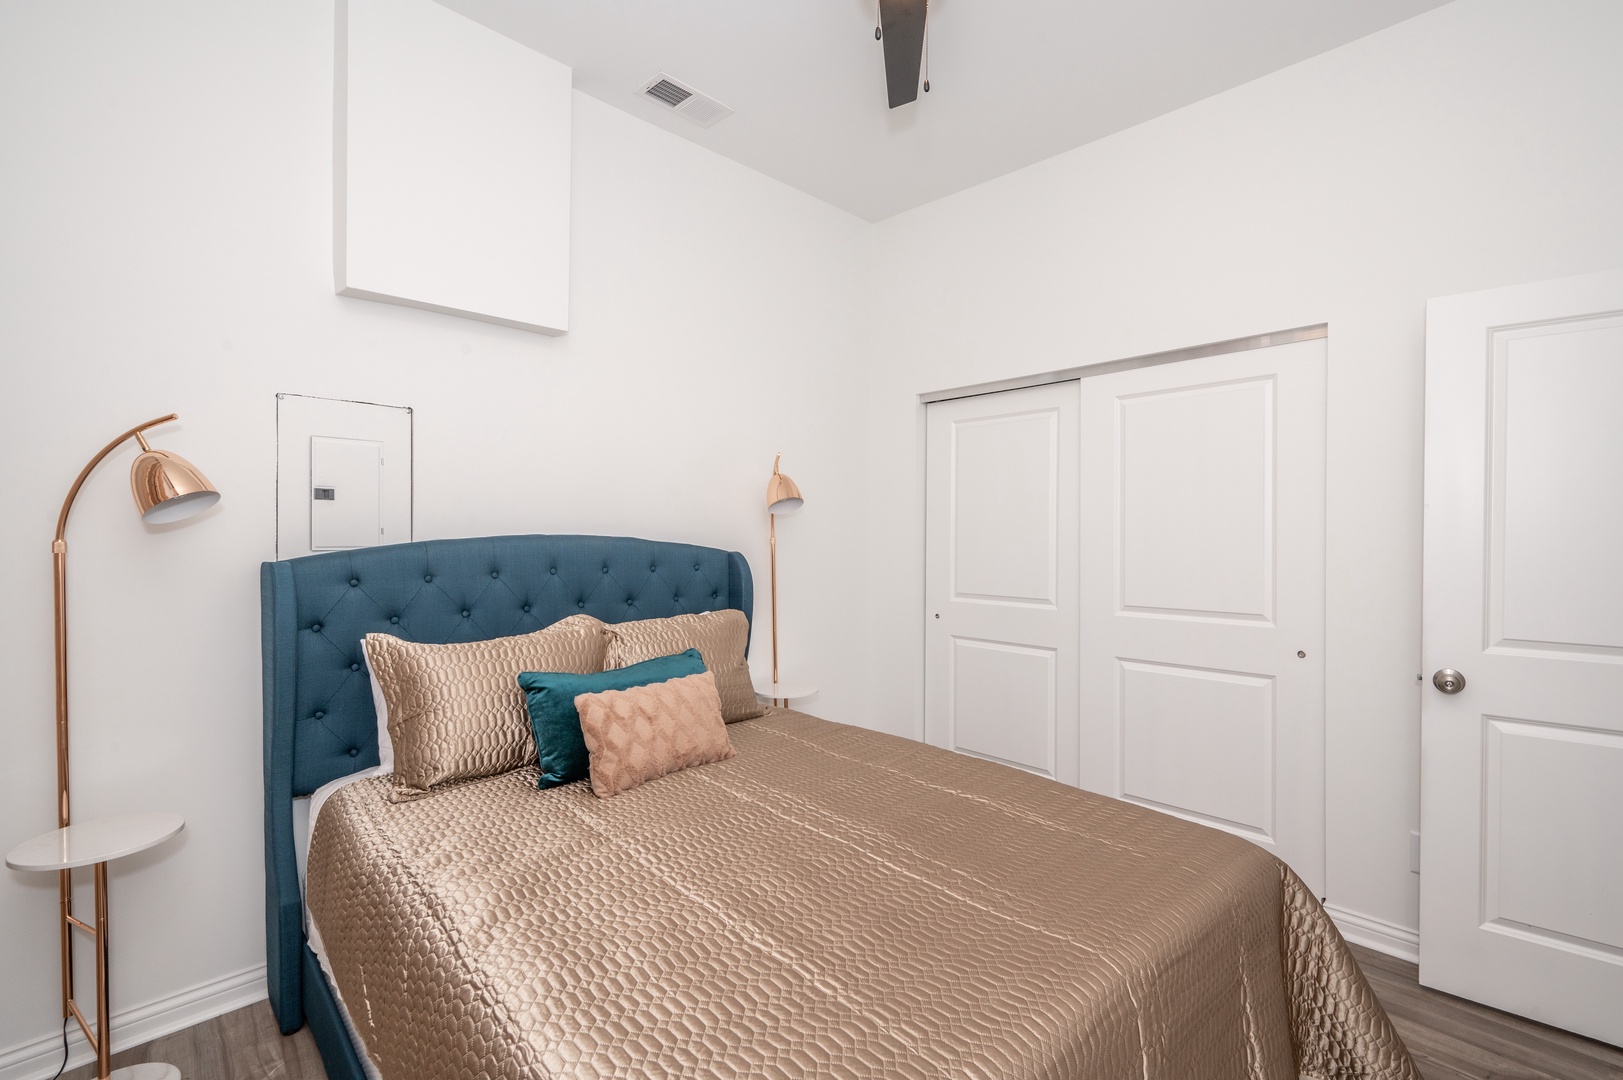 Unit 202: Retreat to your very own queen bedroom after exploring the area